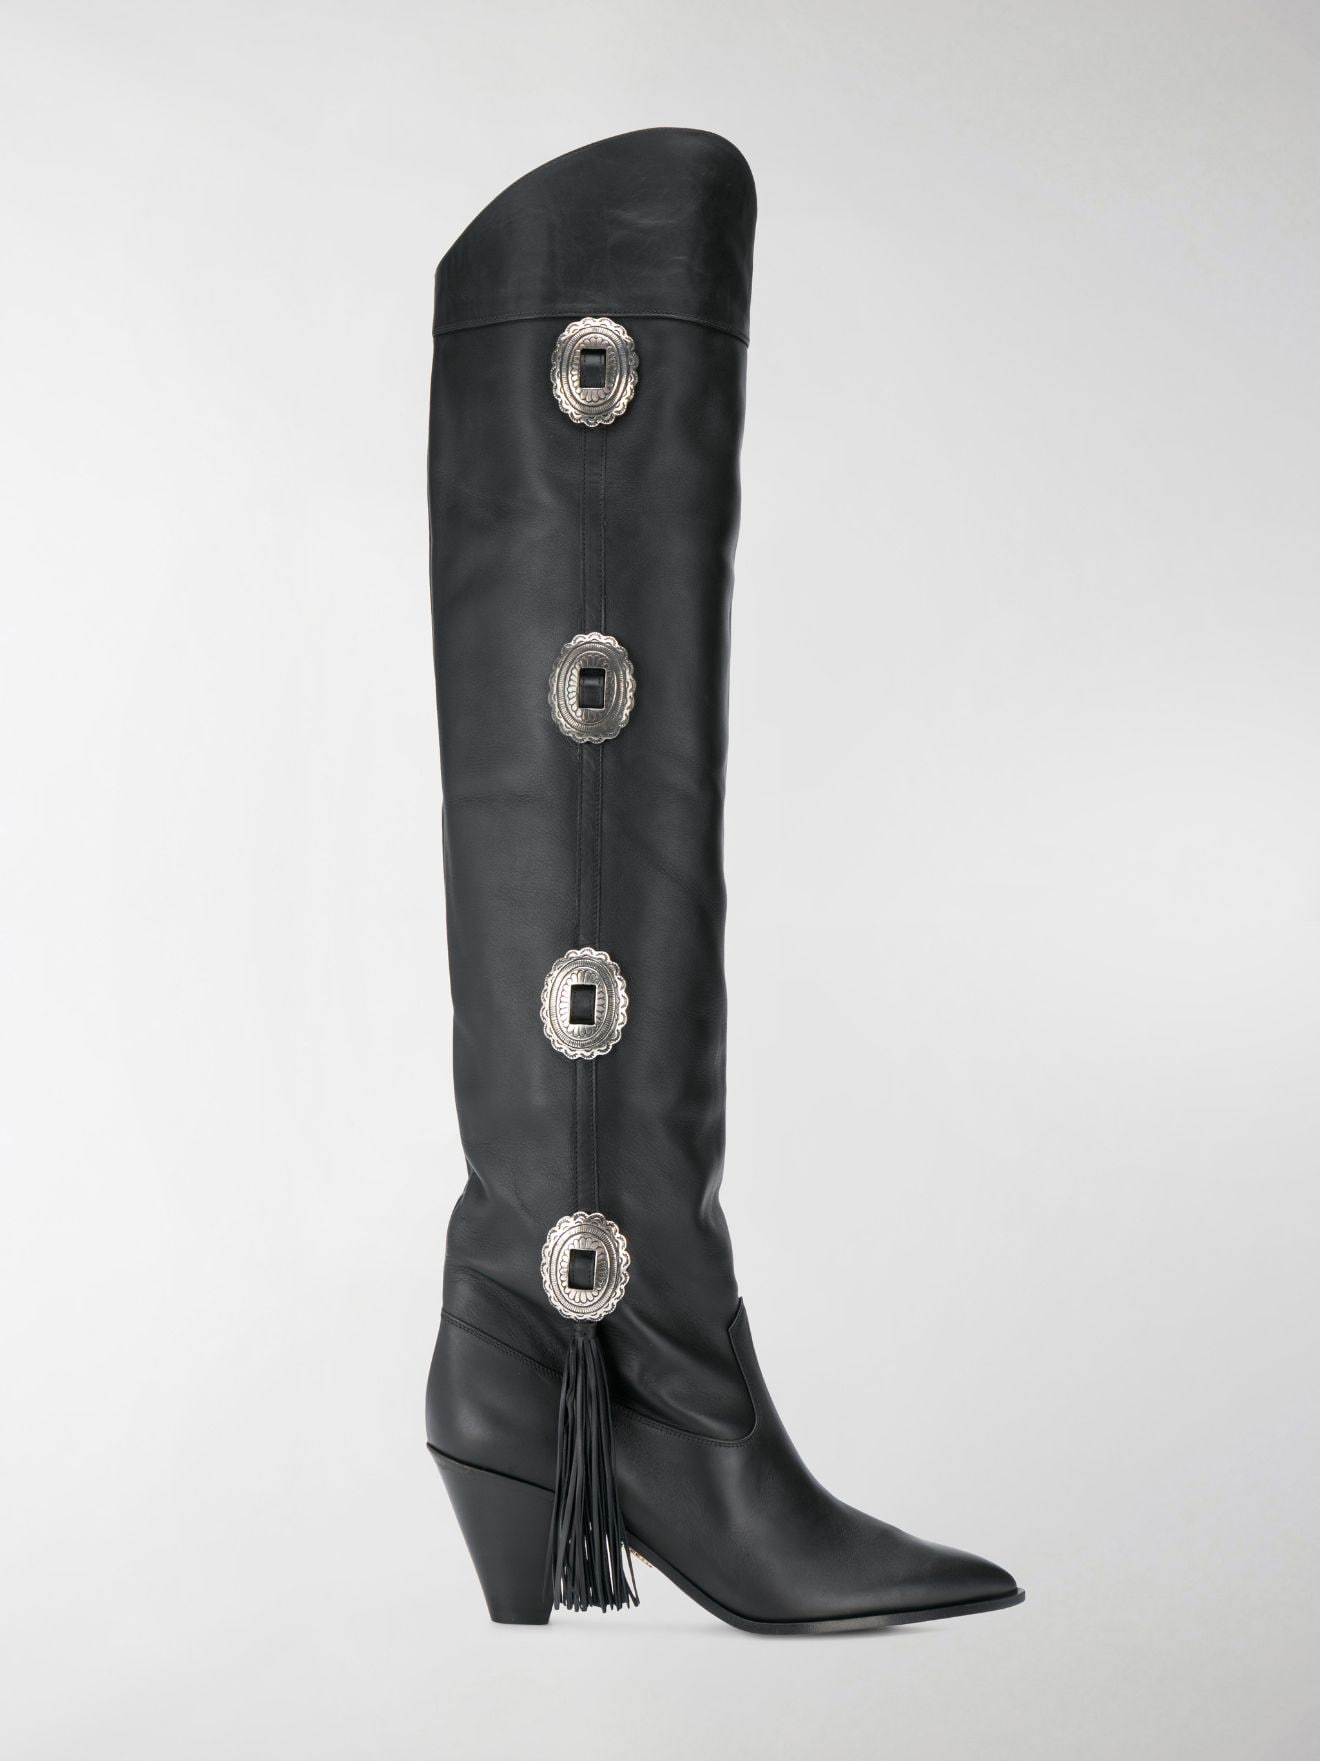 West 70 knee-high studded leather boots 